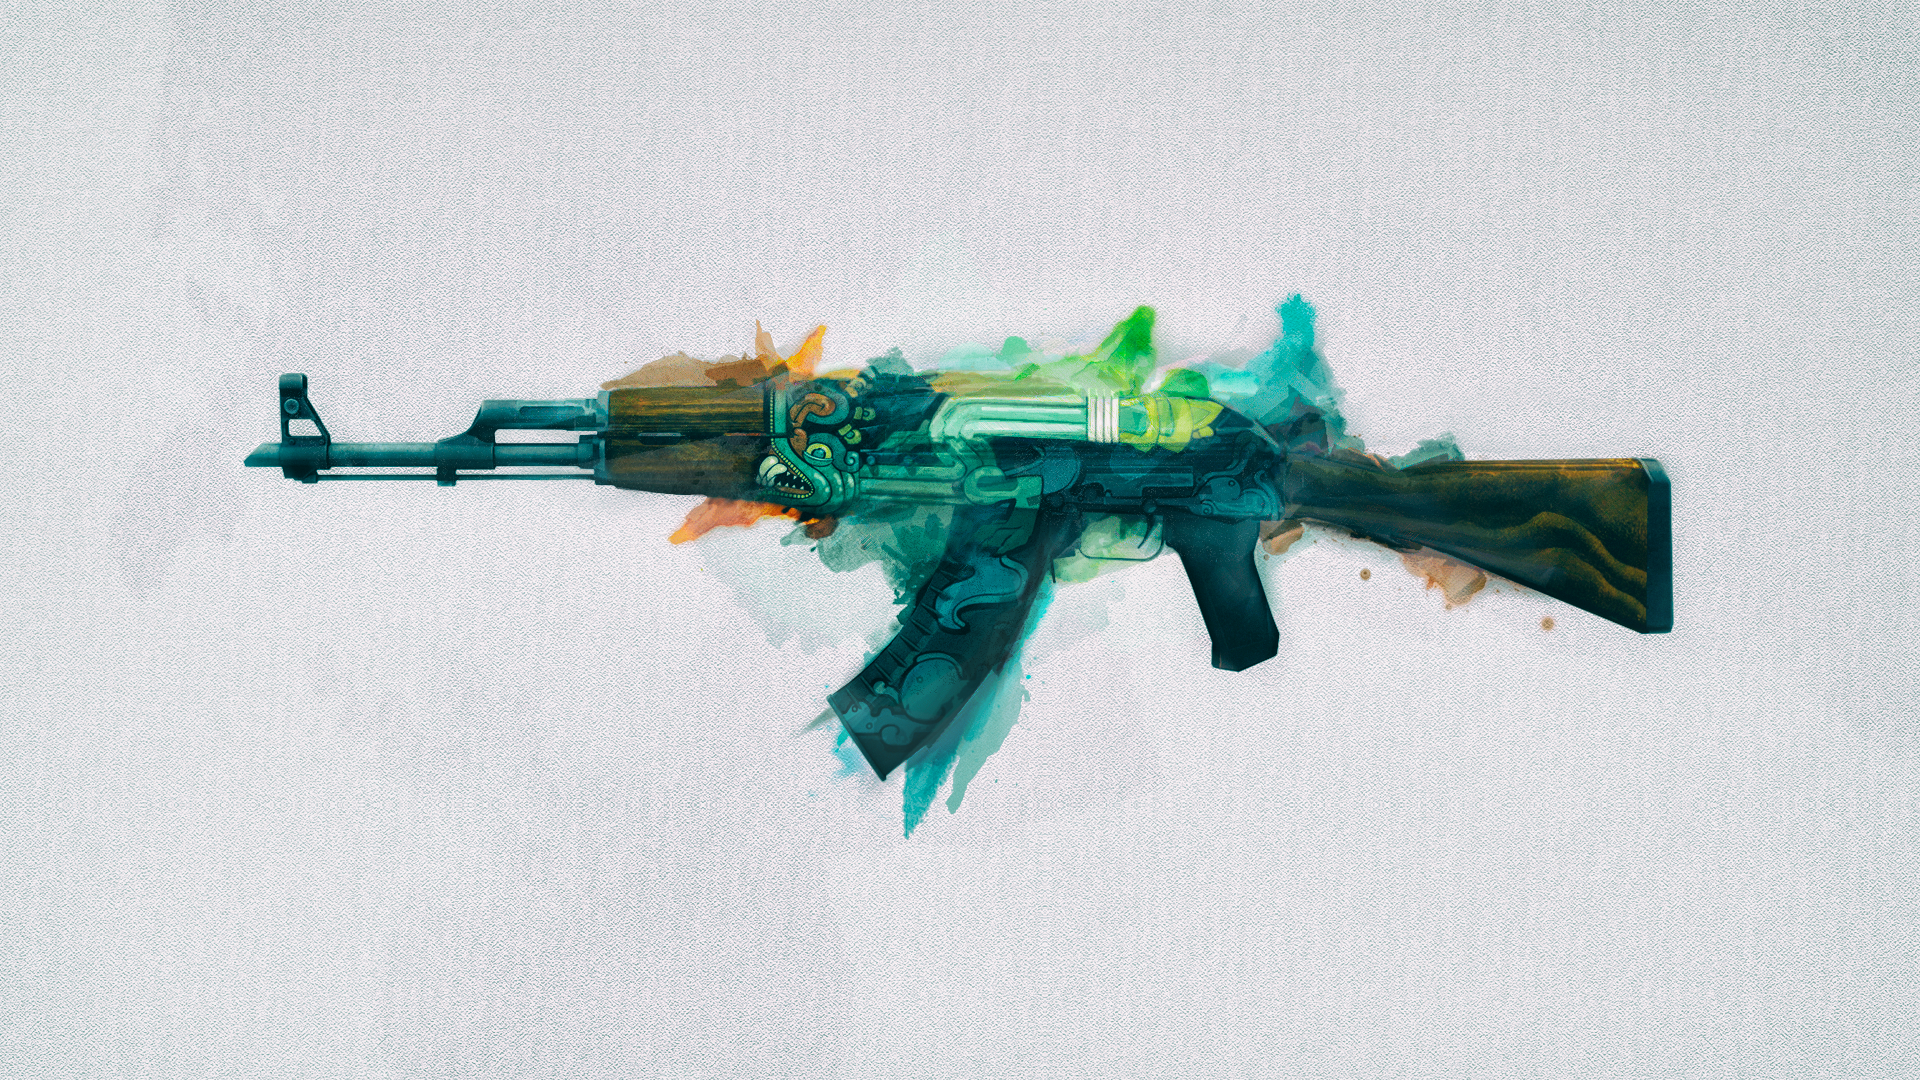 General 1920x1080 Counter-Strike: Global Offensive AKM weapon PC gaming simple background turquoise cyan